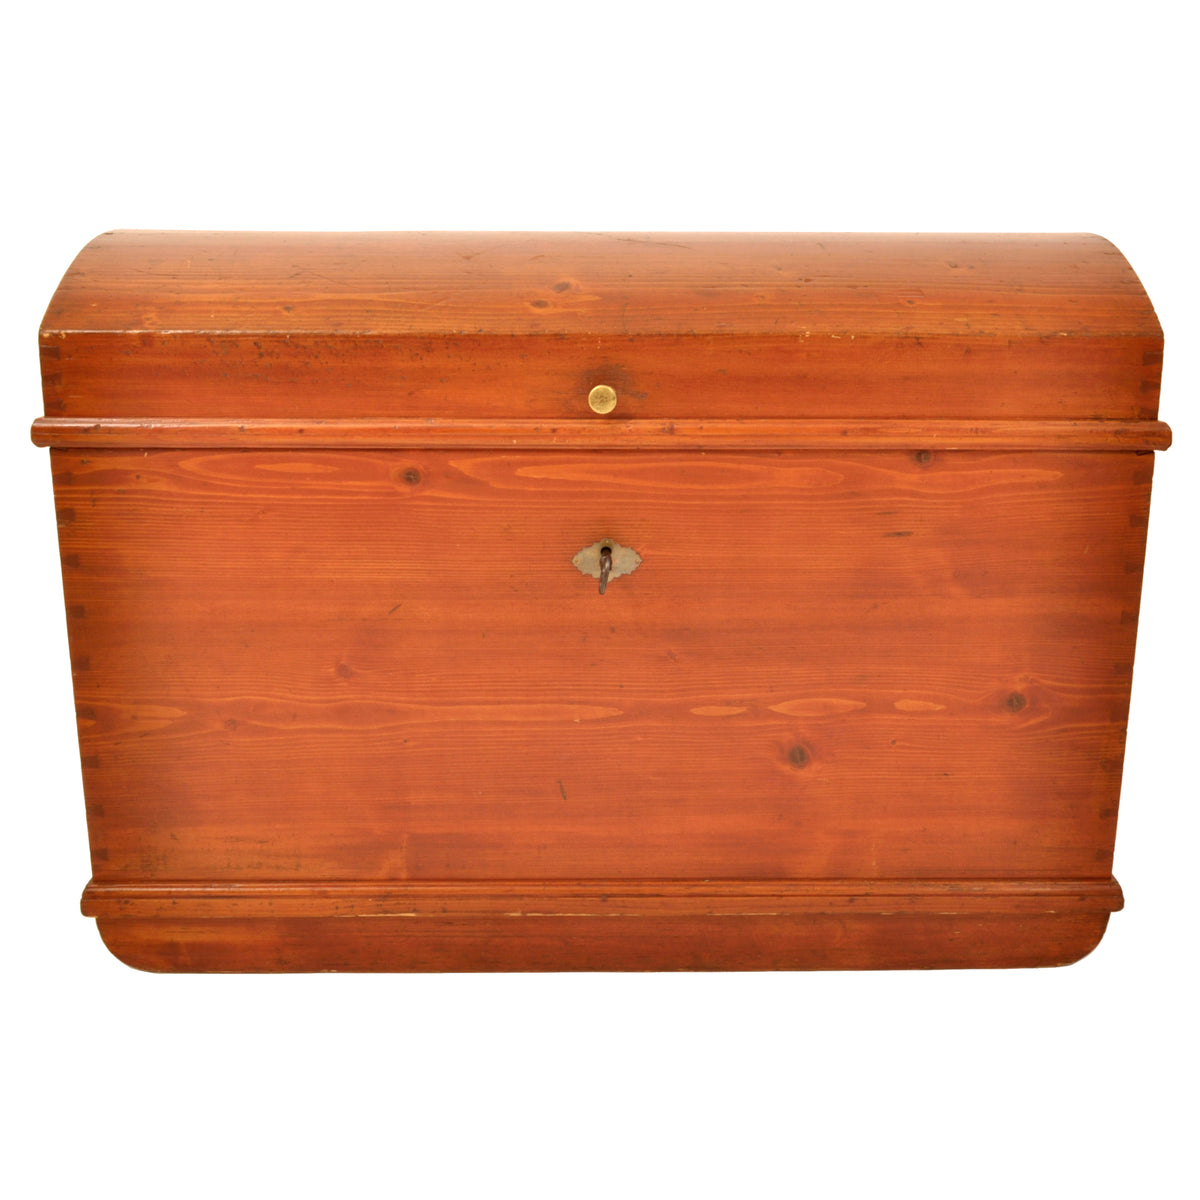 Antique German Painted Pine Immigrant Dome Top Blanket Chest / Trunk / Box, circa 1850